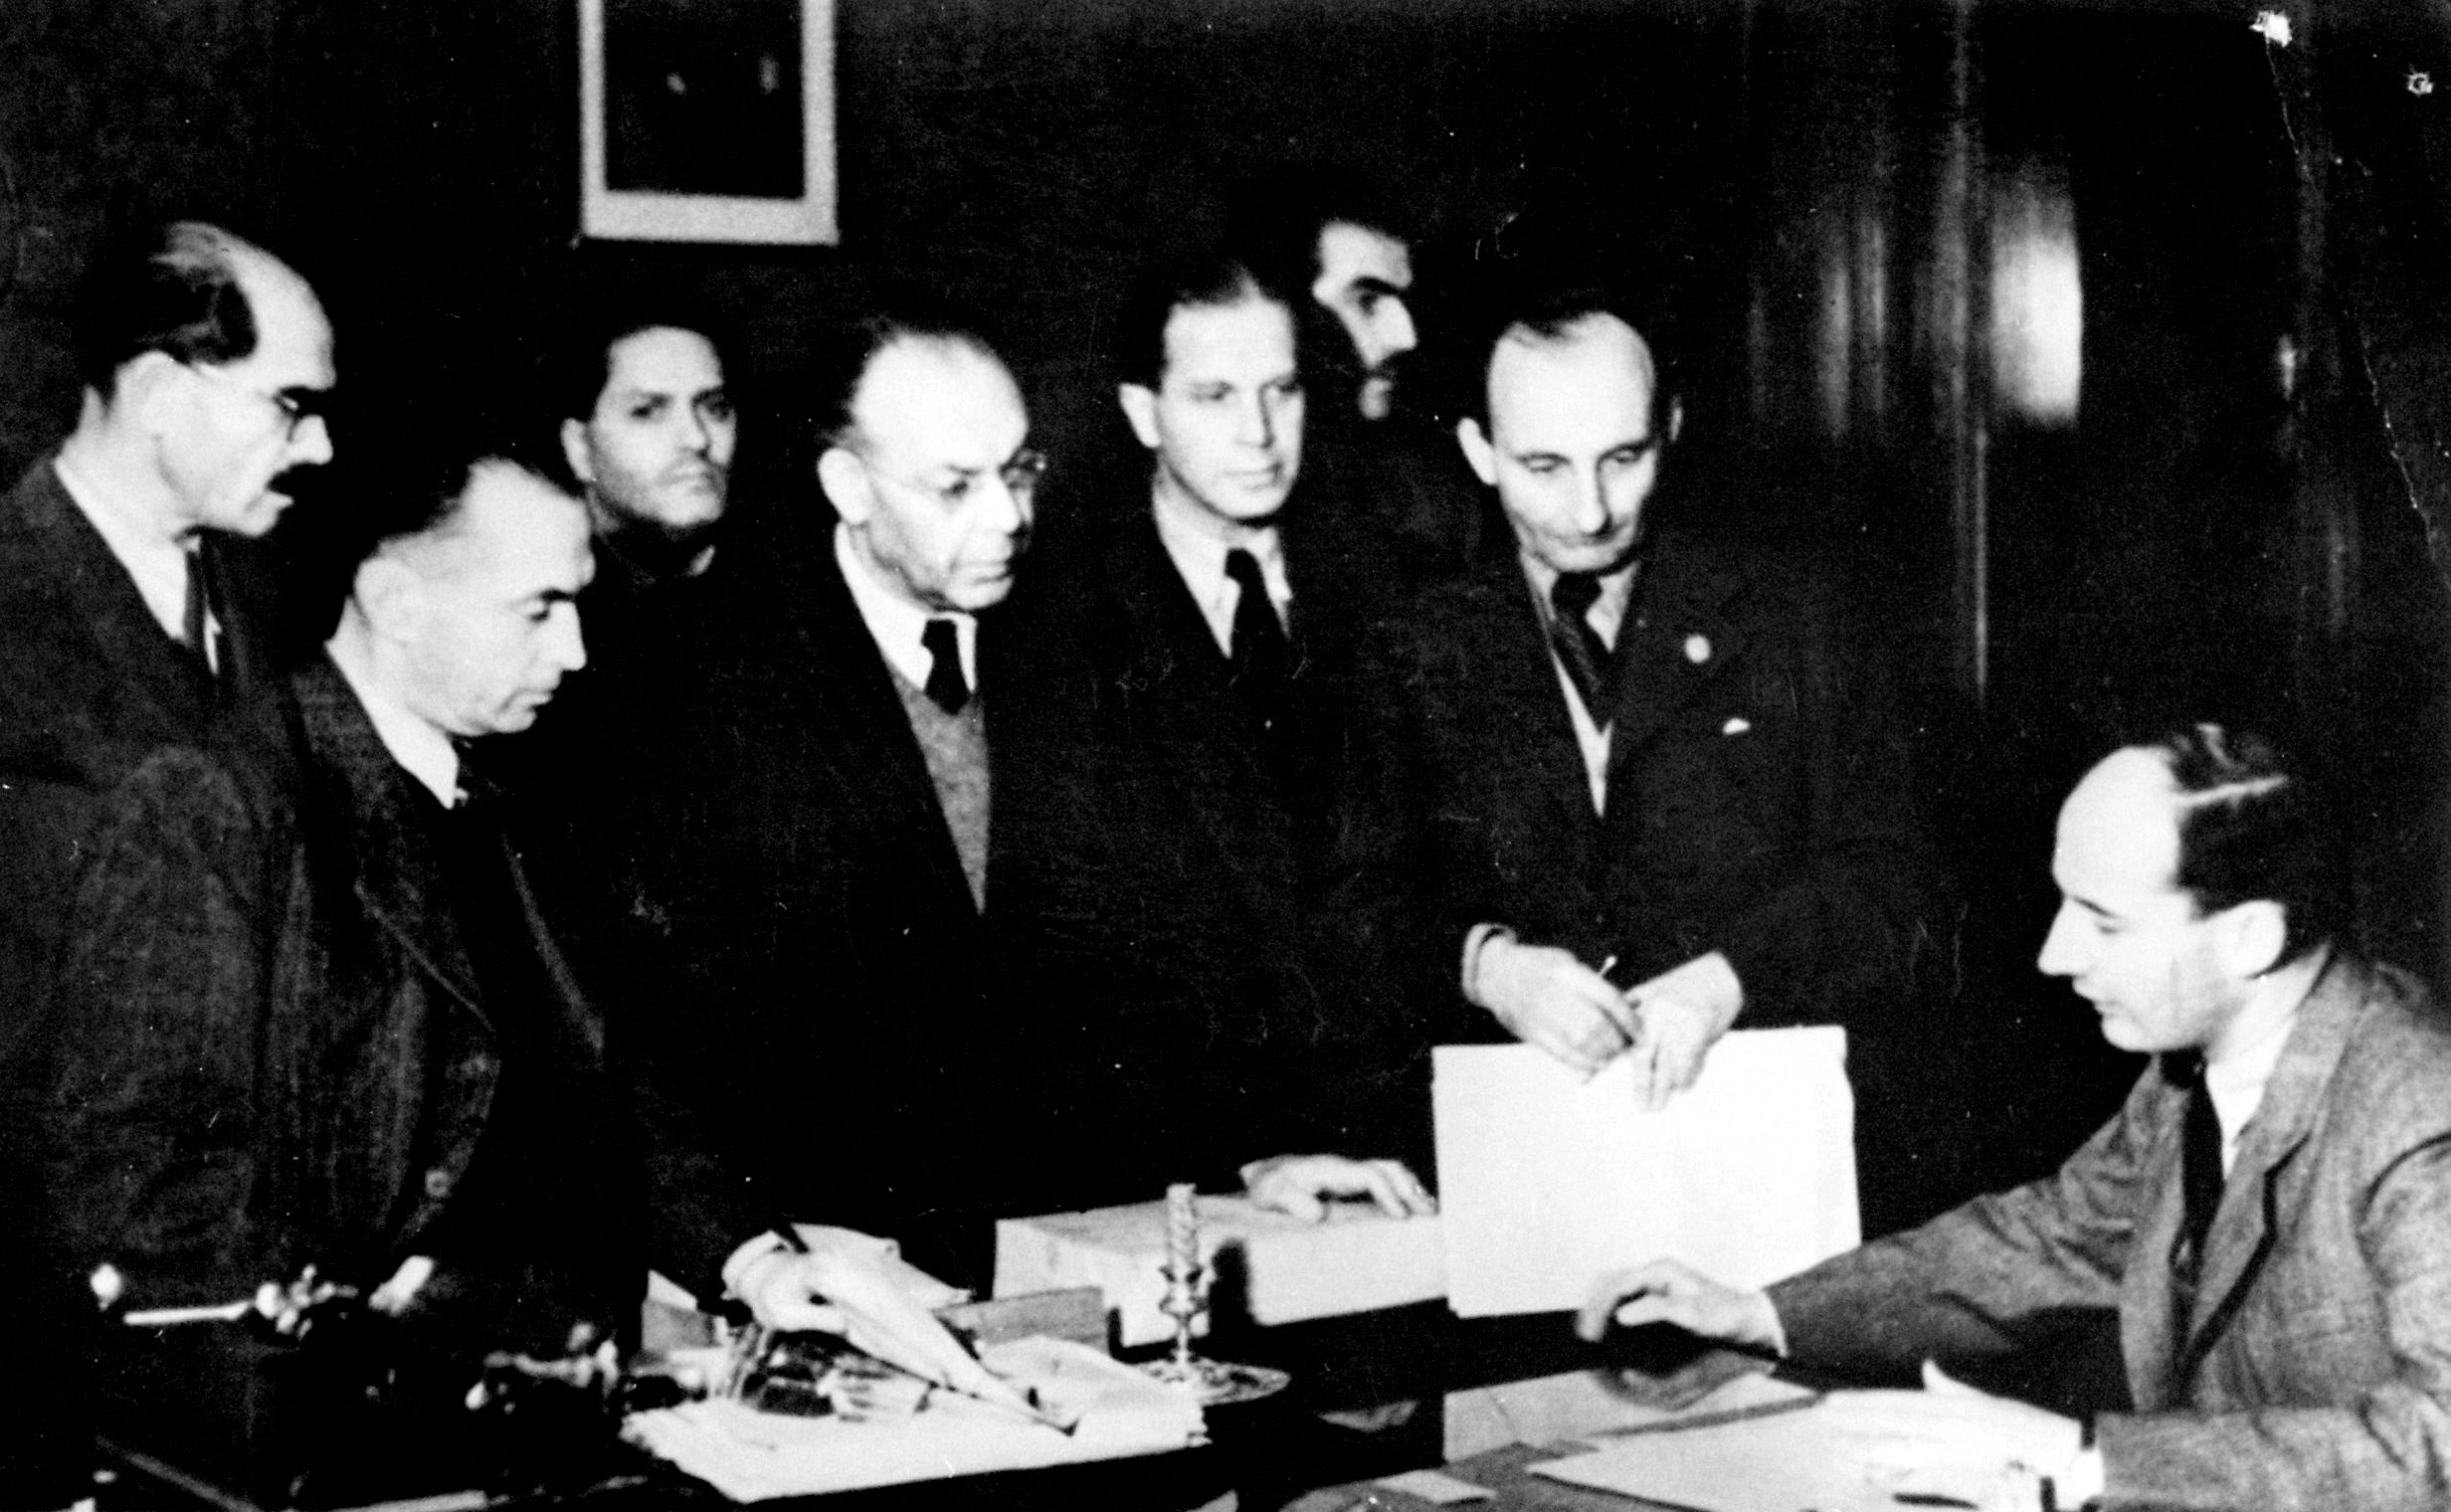 Black-and-white photo of Raoul Wallenberg sitting at a desk. Six men are standing facing him on the other side of the desk.